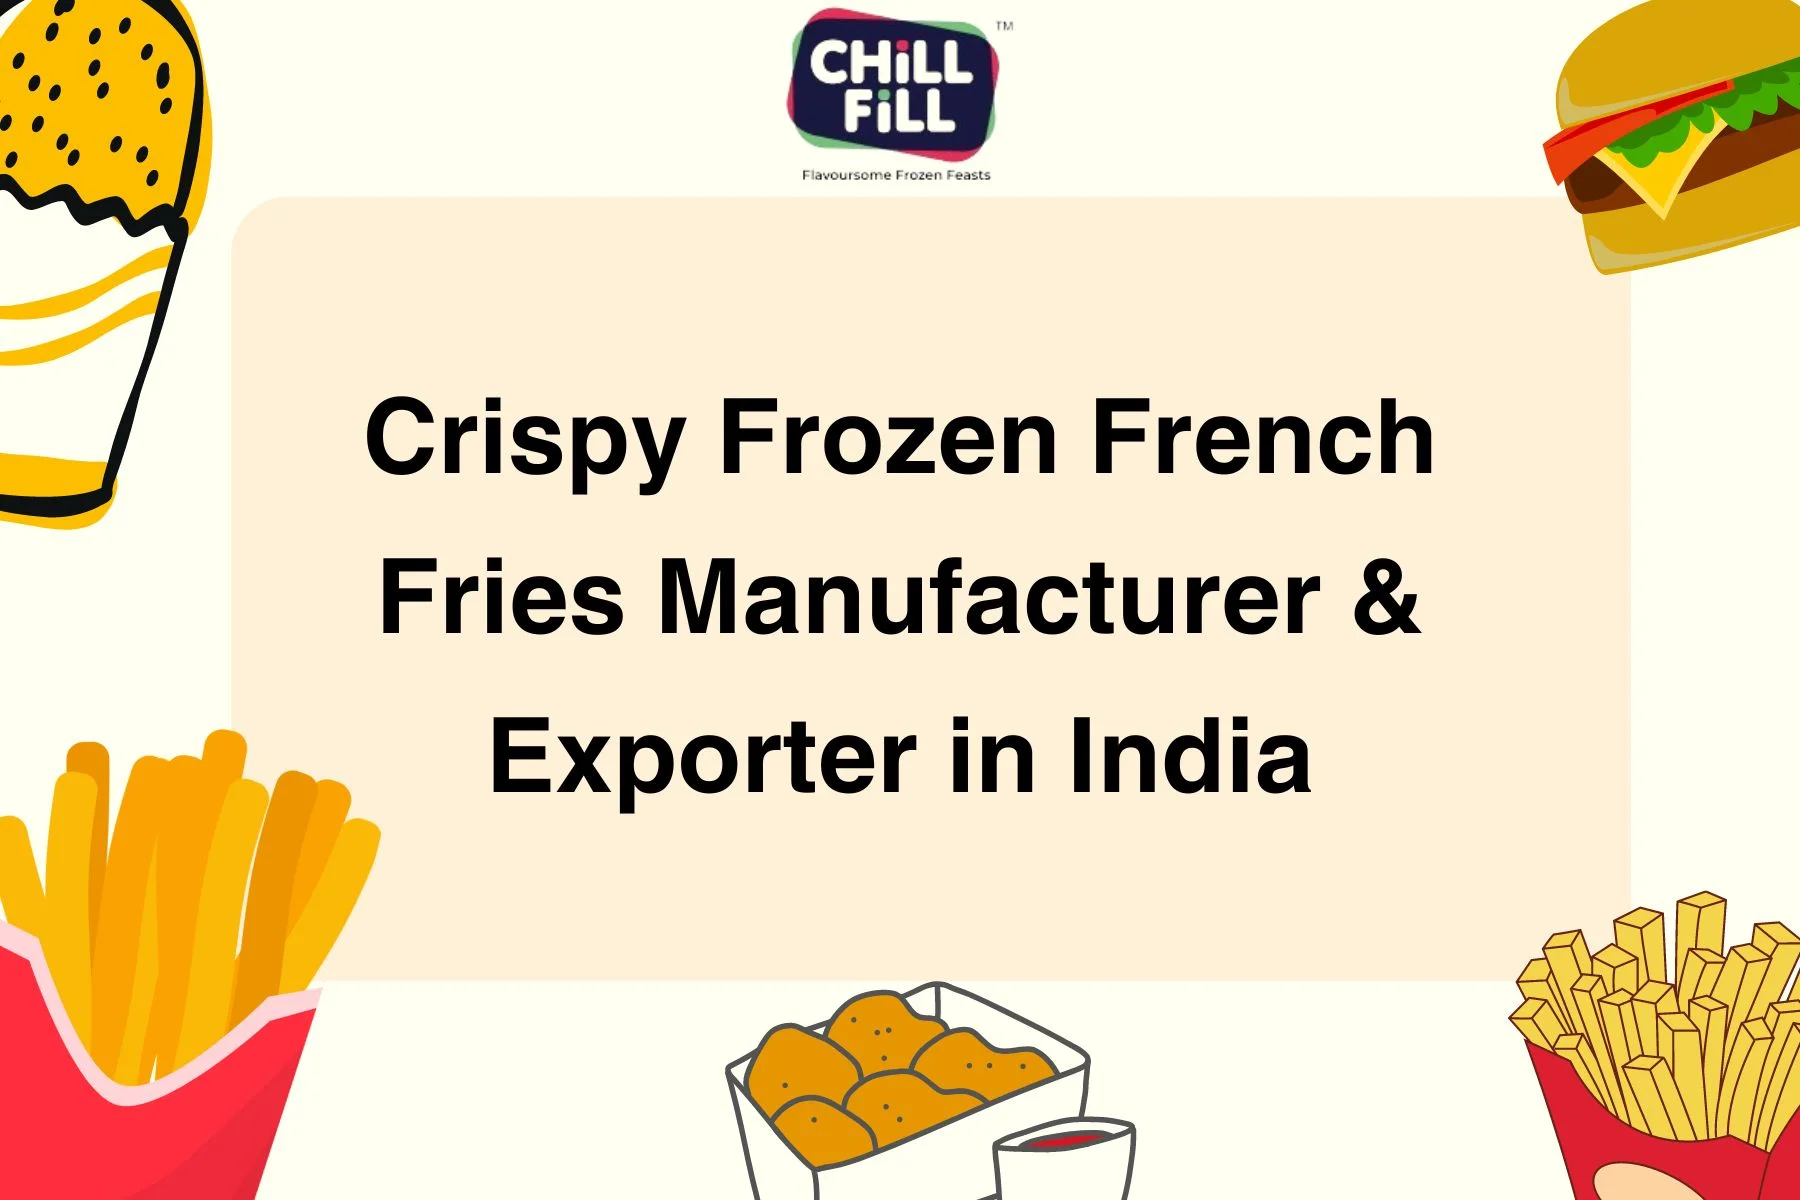 Crispy Frozen French Fries Manufacturer & Exporter In India